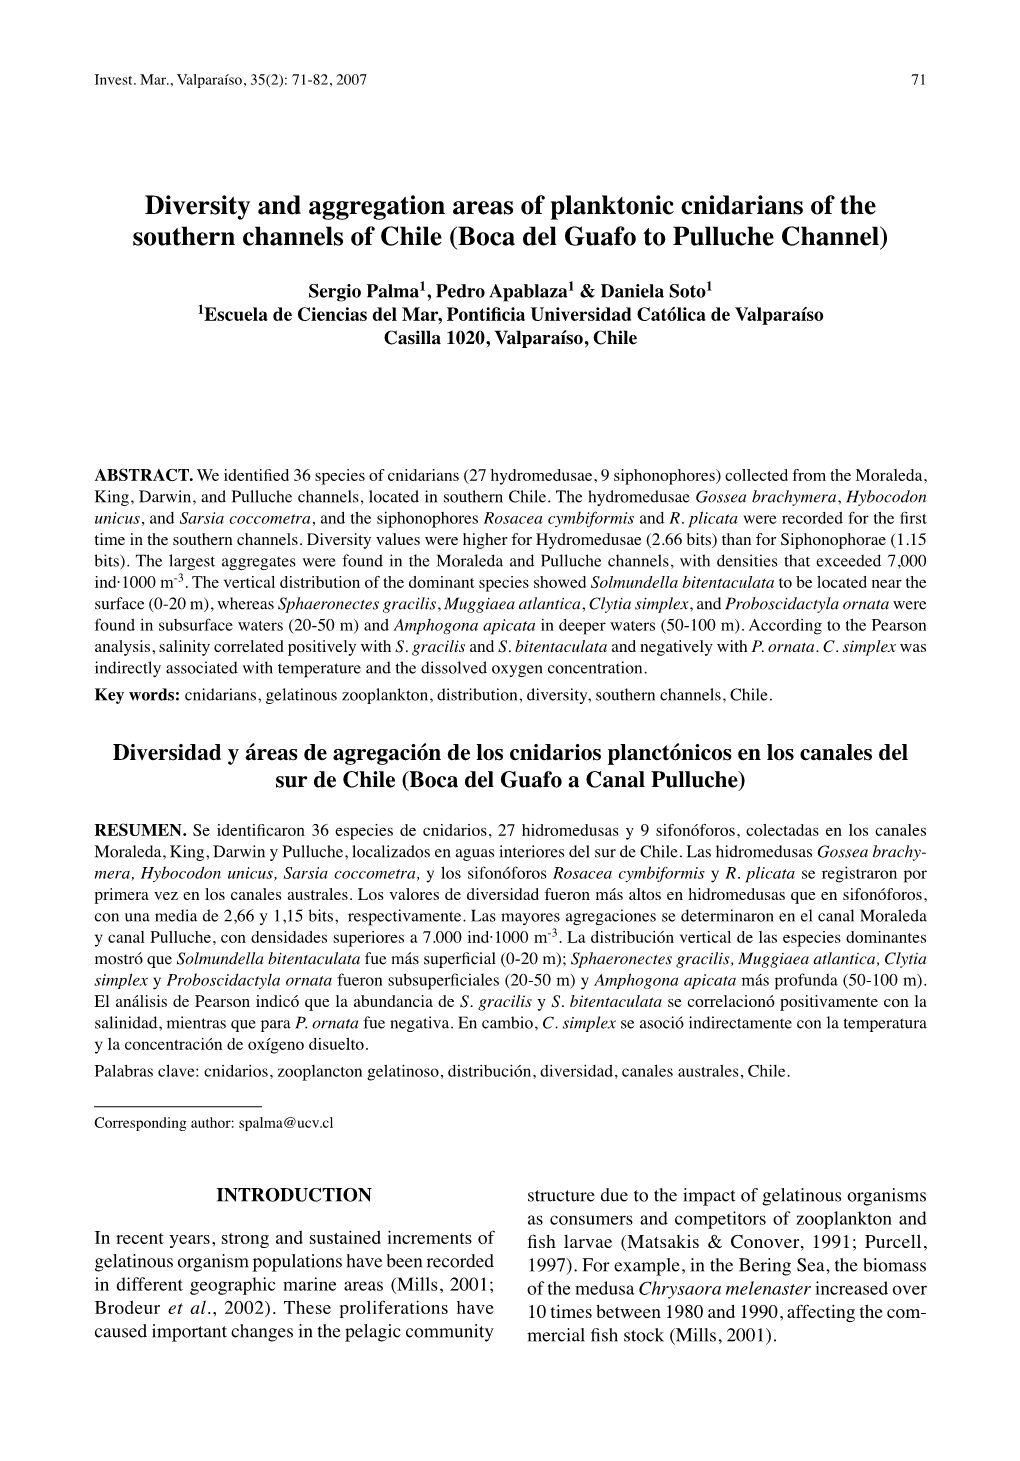 Diversity and Aggregation Areas of Planktonic Cnidarians of the Southern Channels of Chile (Boca Del Guafo to Pulluche Channel)